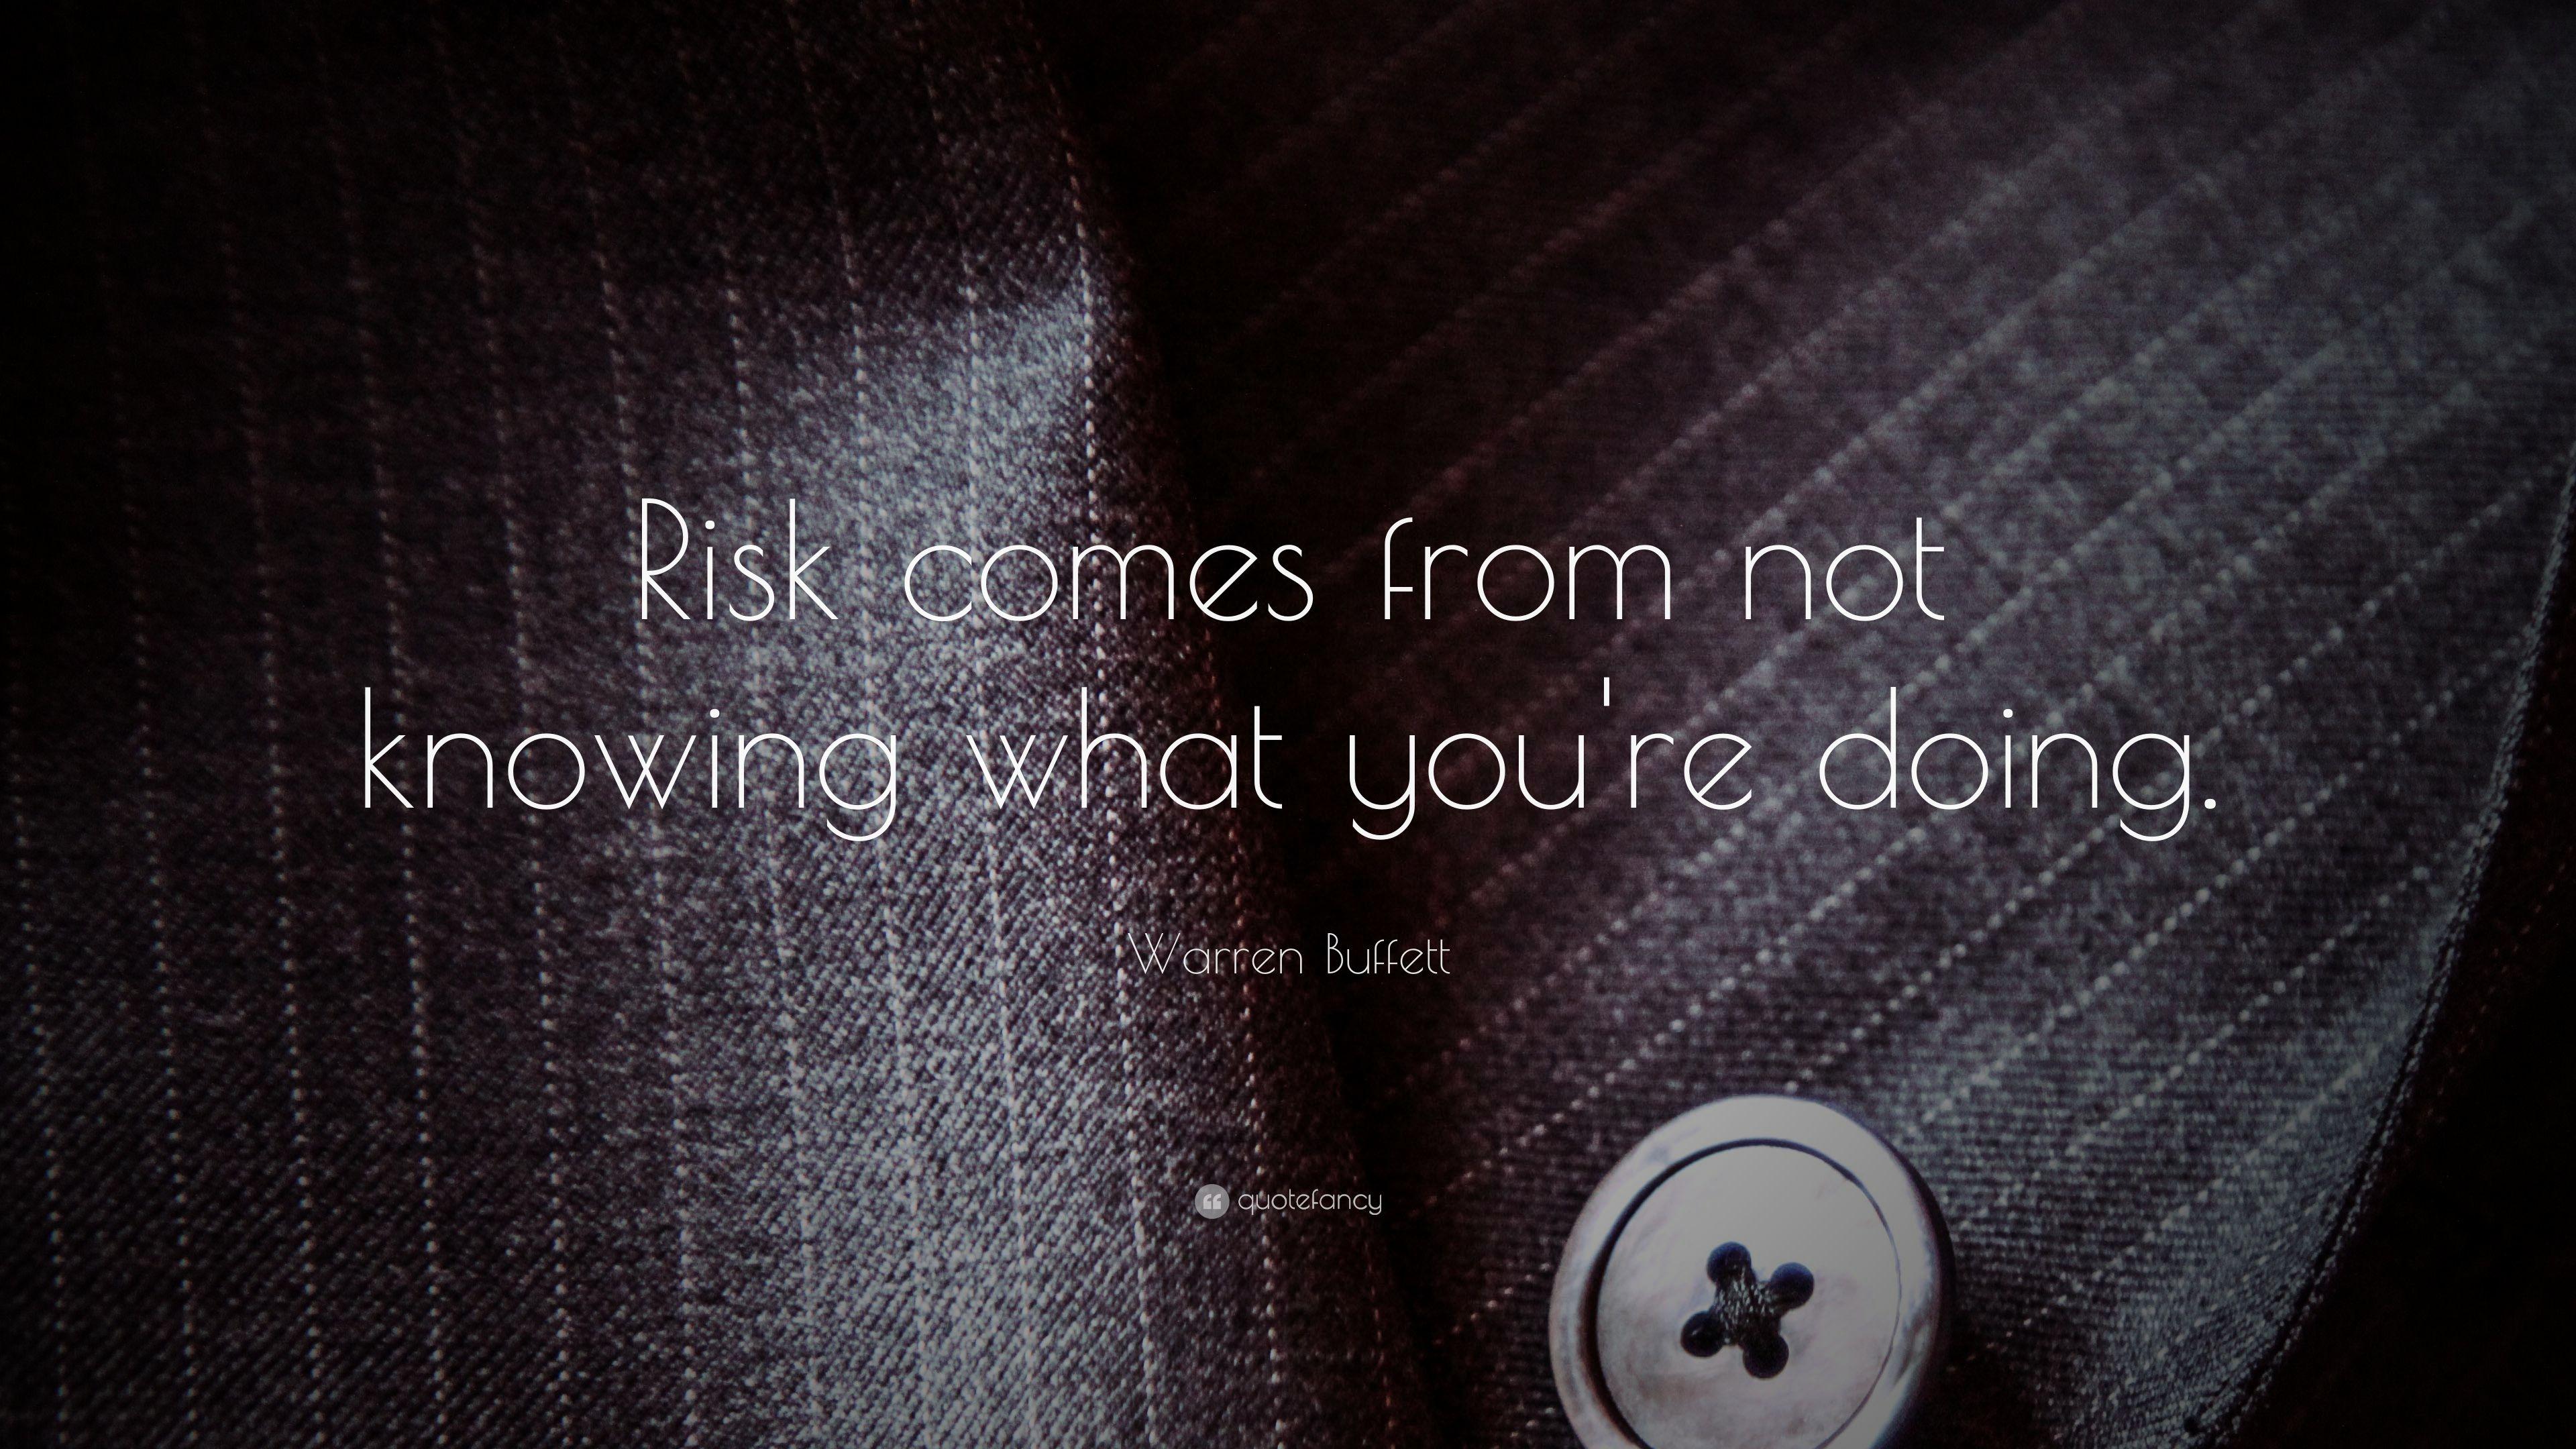 Warren Buffett Quote: “Risk comes from not knowing what you're